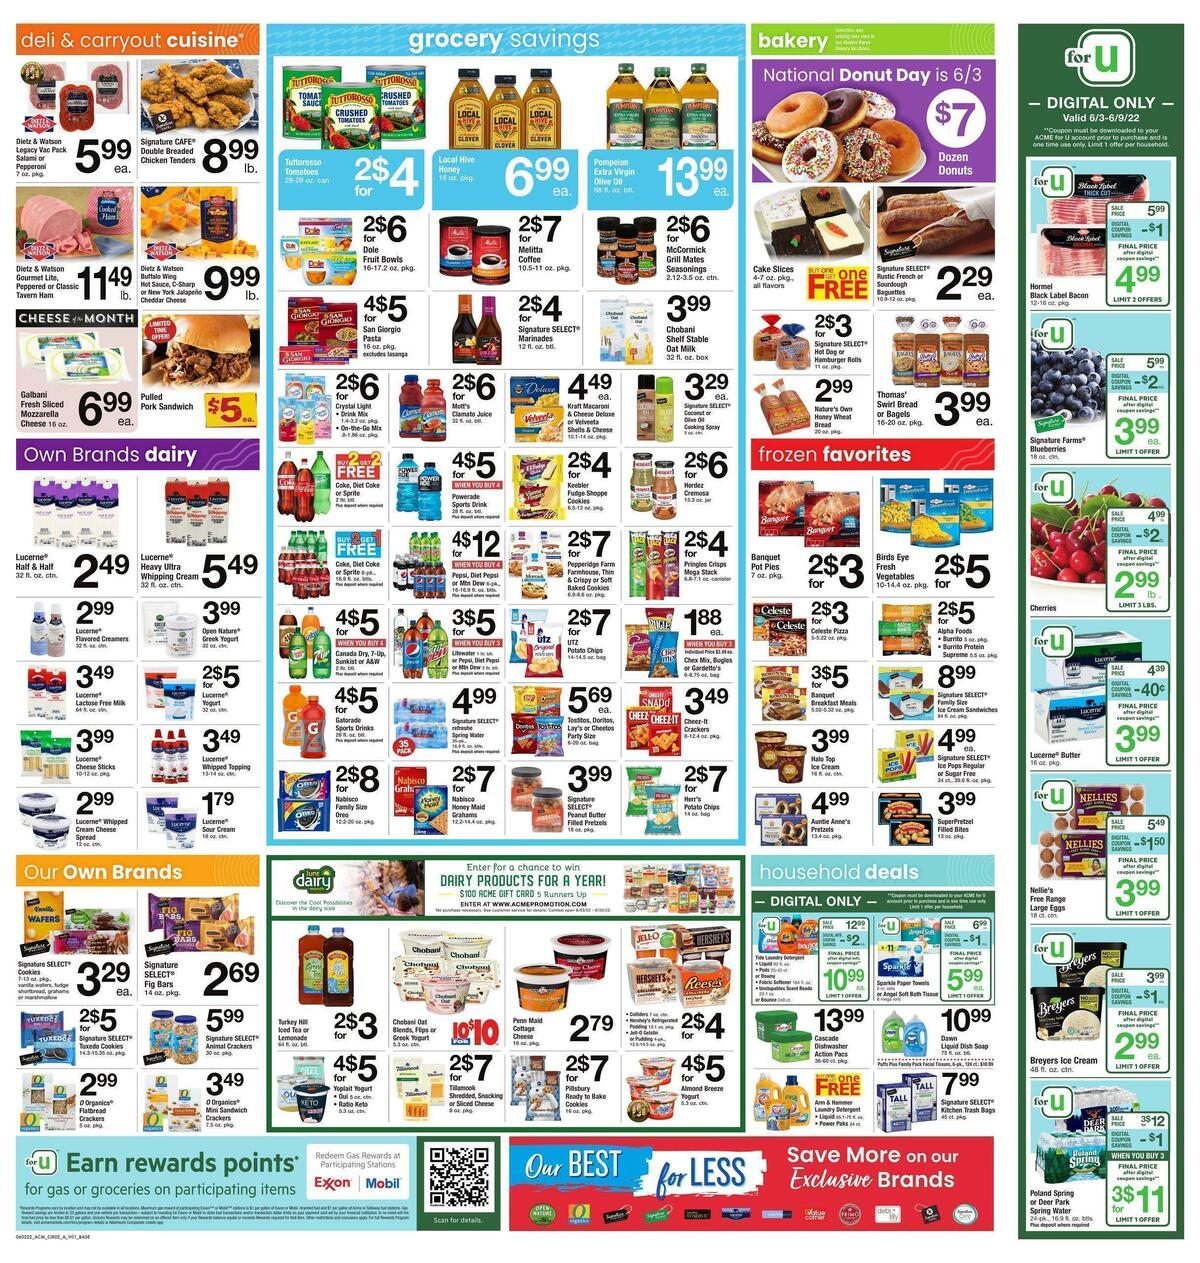 ACME Markets Weekly Ad from June 3